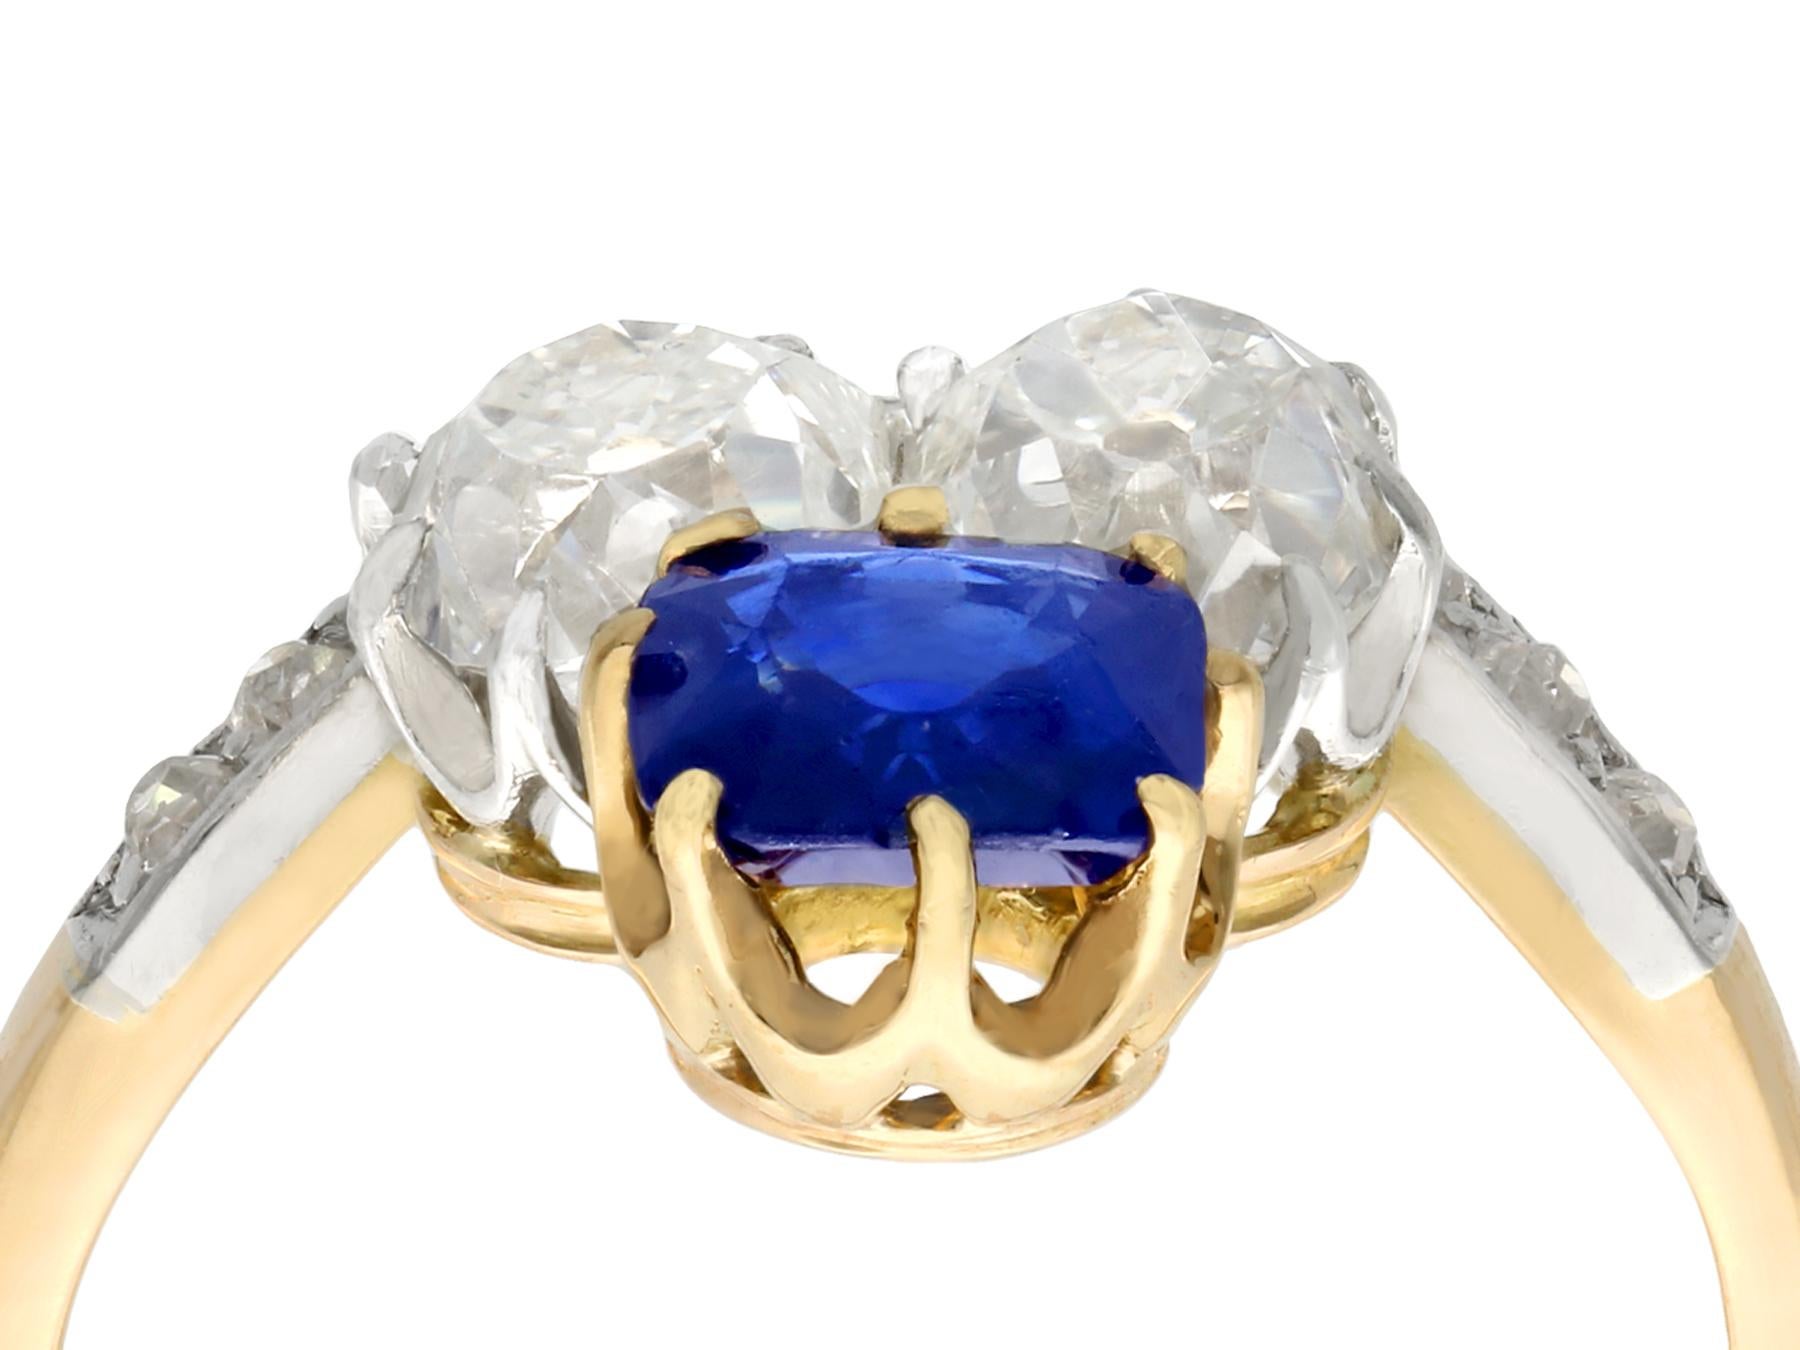 A stunning and impressive antique 1.35 carat Basaltic sapphire and 2.06 carat diamond, 18 karat yellow gold and platinum set cocktail ring; part of our antique jewelry collections

A stunning and impressive antique 1.35Ct blue sapphire and 2.06Ct